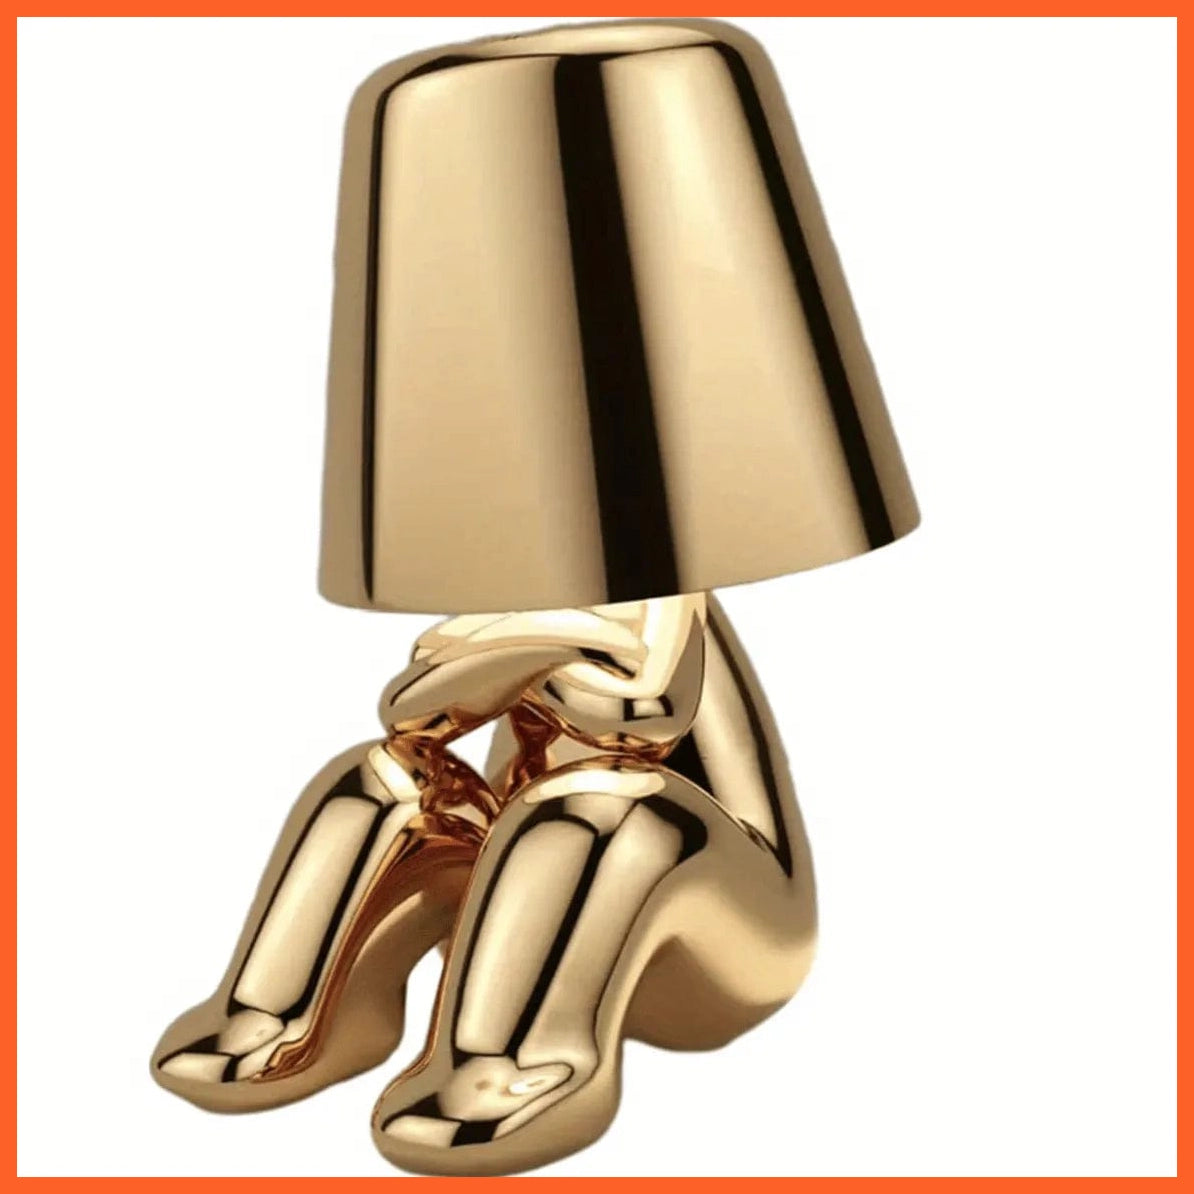 whatagift.com.au E Golden Color Thinker Statue LED Table Lamp With USB Port| Nightstand Lamp For Home, Living Room